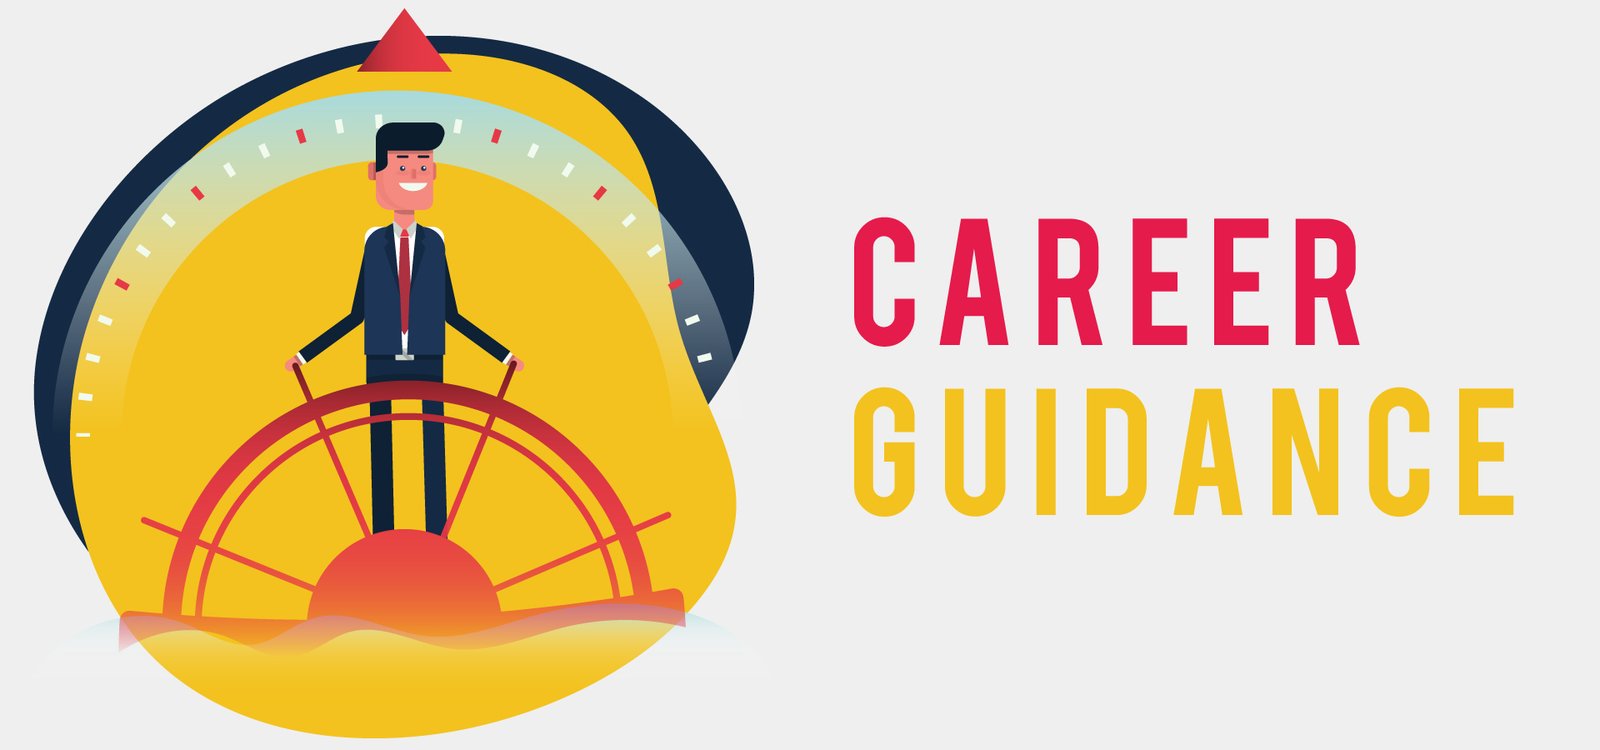 What is career guidance - importance - benefits